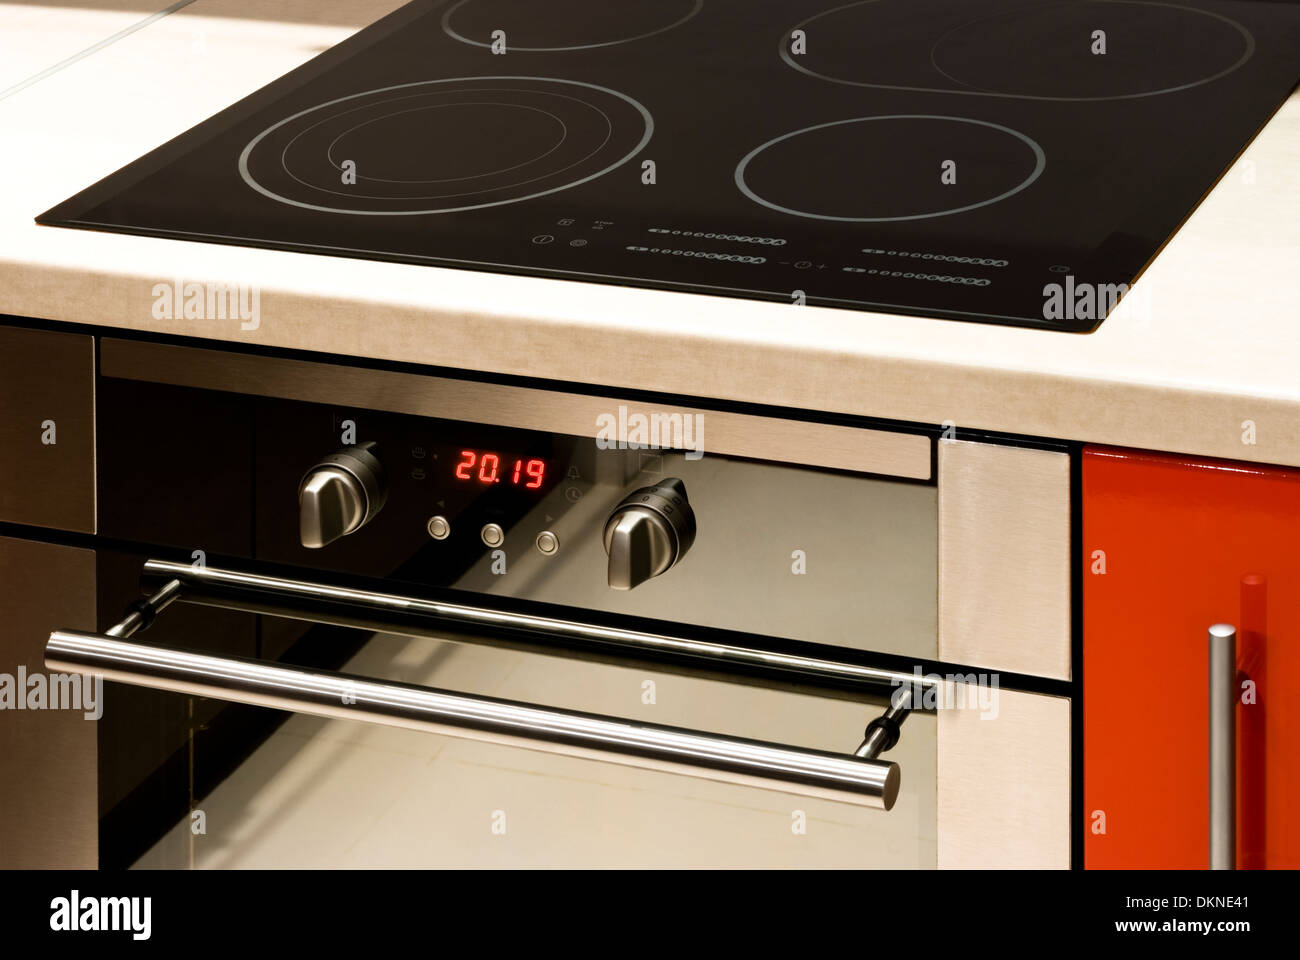 https://c8.alamy.com/comp/DKNE41/modern-electric-oven-with-digital-display-and-controls-DKNE41.jpg